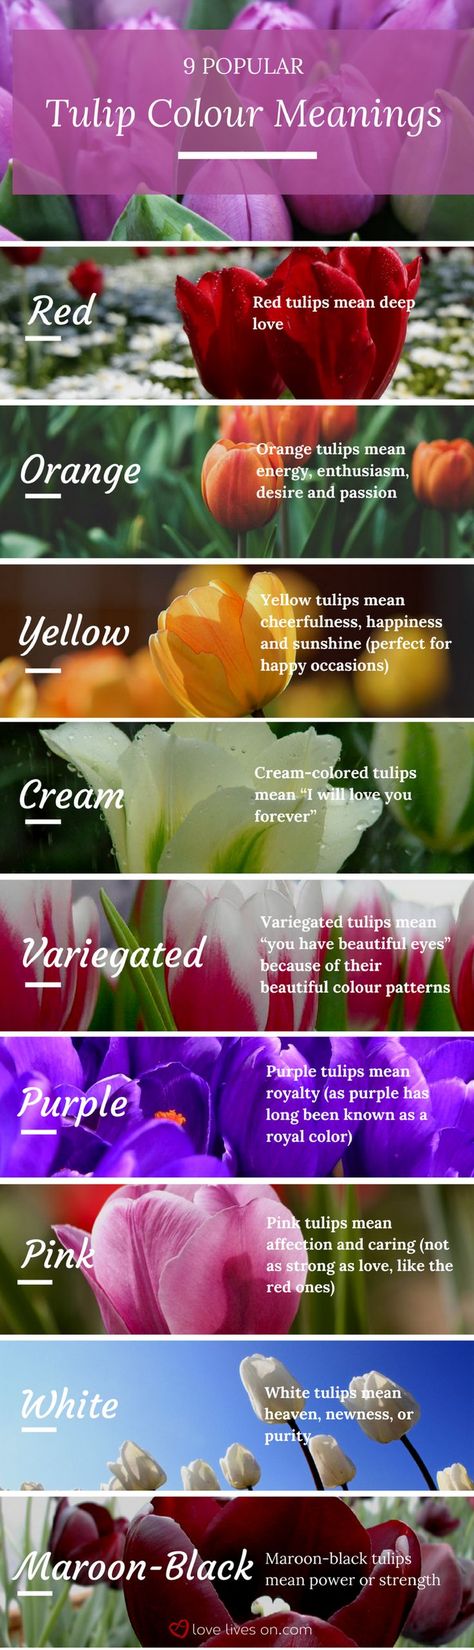 Infographic: 9 Popular Tulip Colour Meanings. Learn tulip colour meanings so you can create a meaningful sympathy or funeral arrangement. Floral, Inspiration, Gardening, Meaning Of Tulips, Types Of Tulips, Tulips Meaning, Tulip Colors, Tulips Meaning Language Of Flowers, Orange Tulips